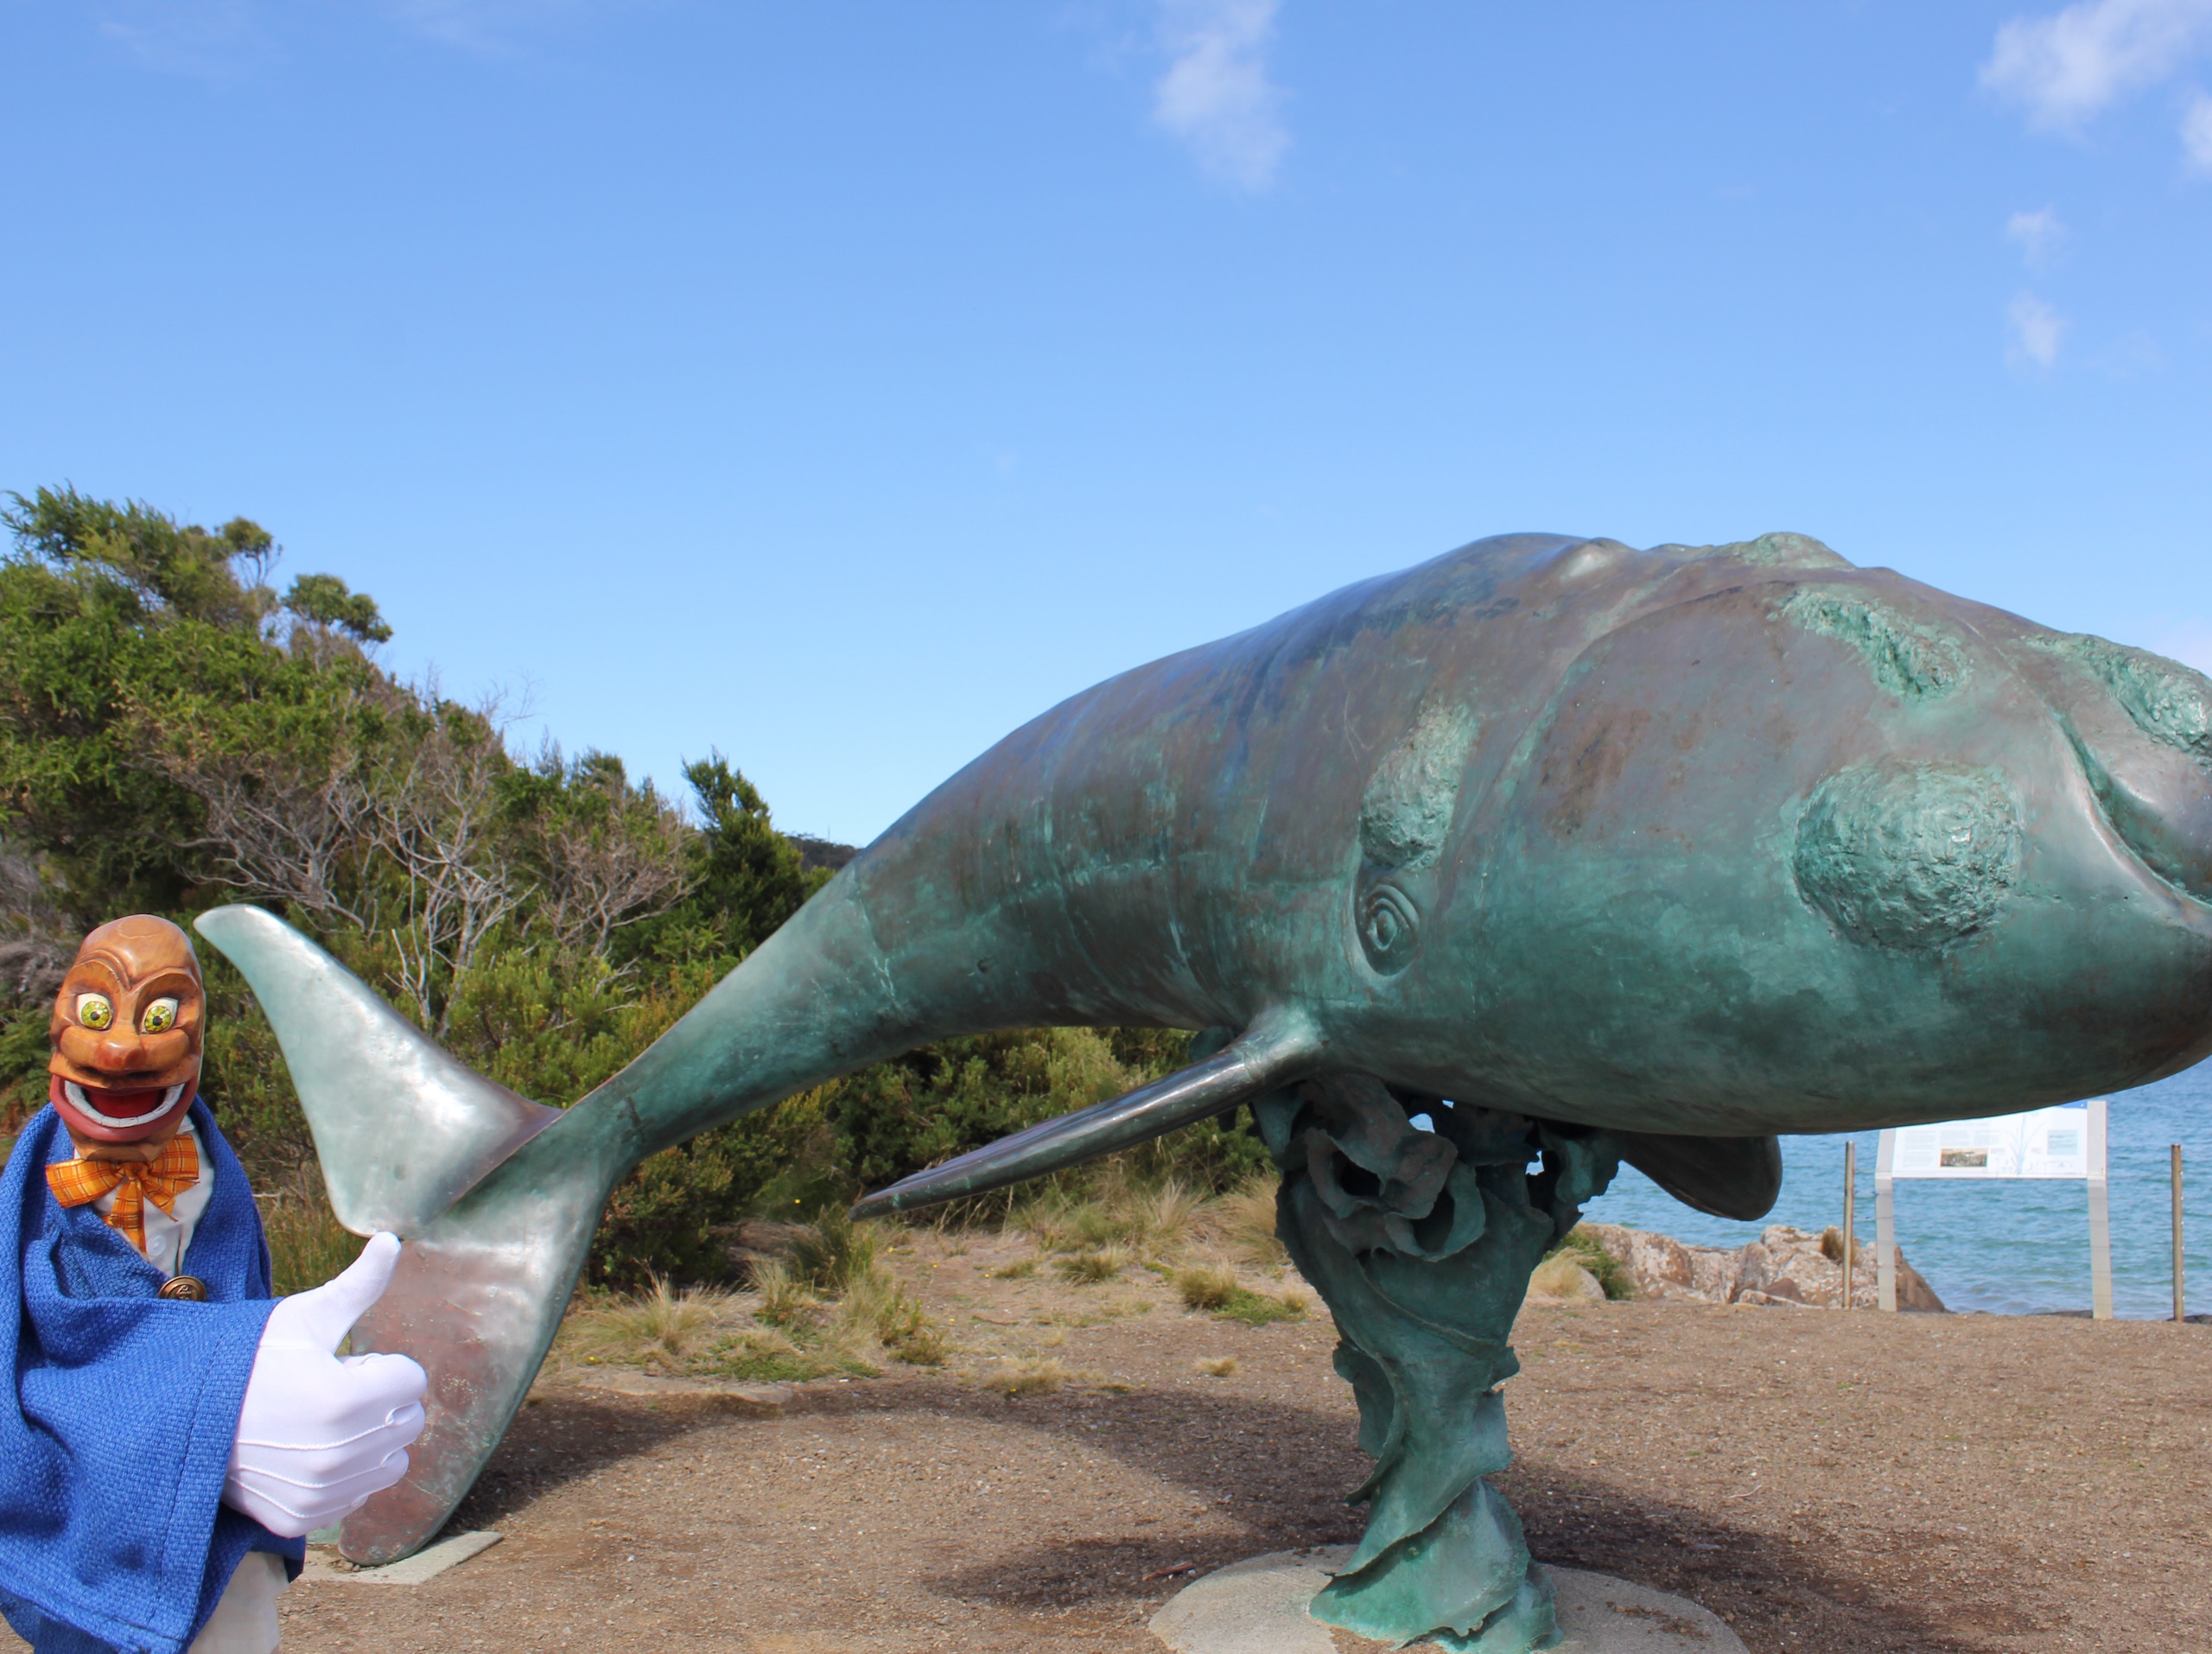 Igor in Cockle Creek in Tasmania in front of the whale sculpture